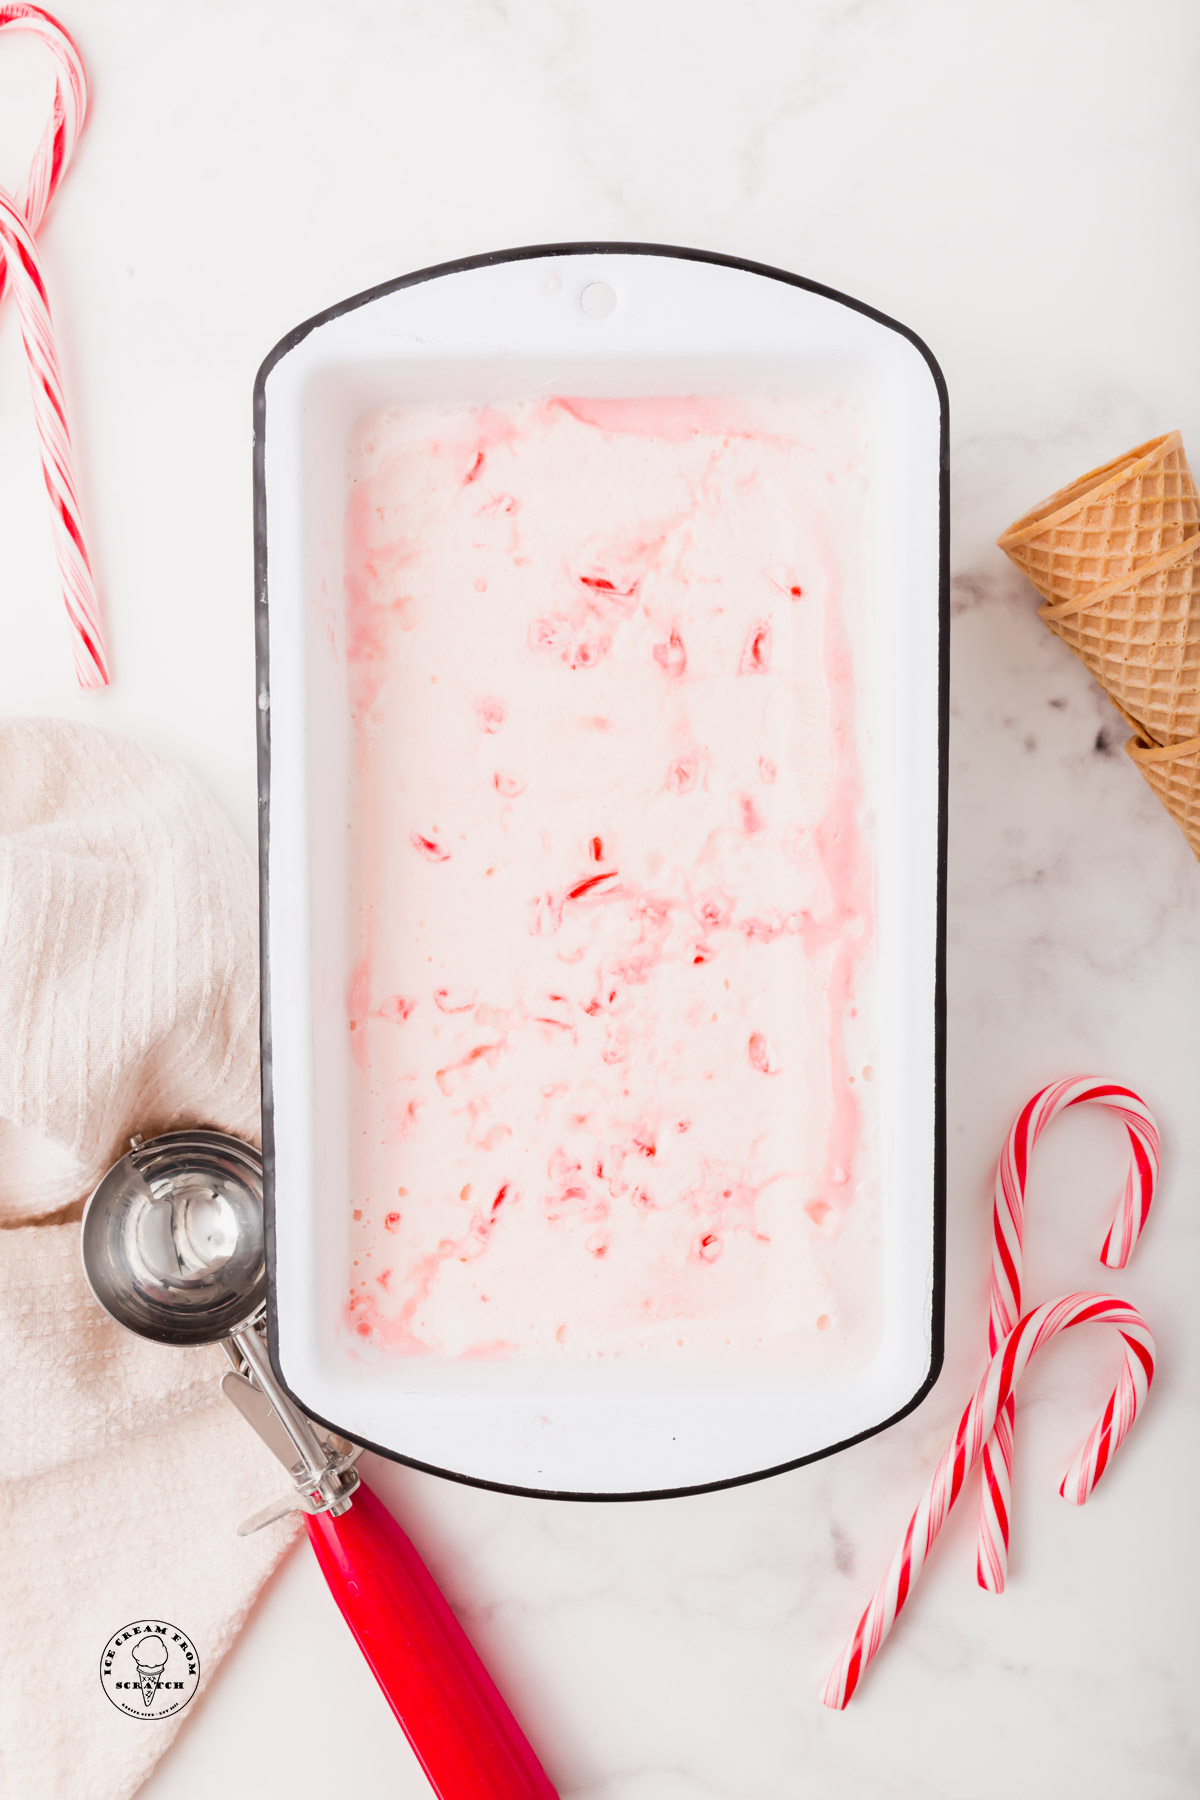 Homemade candy cane ice cream in a white bread loaf pan. Next to the pan is a red ice cream scoop, whole candy canes, and sugar cones.